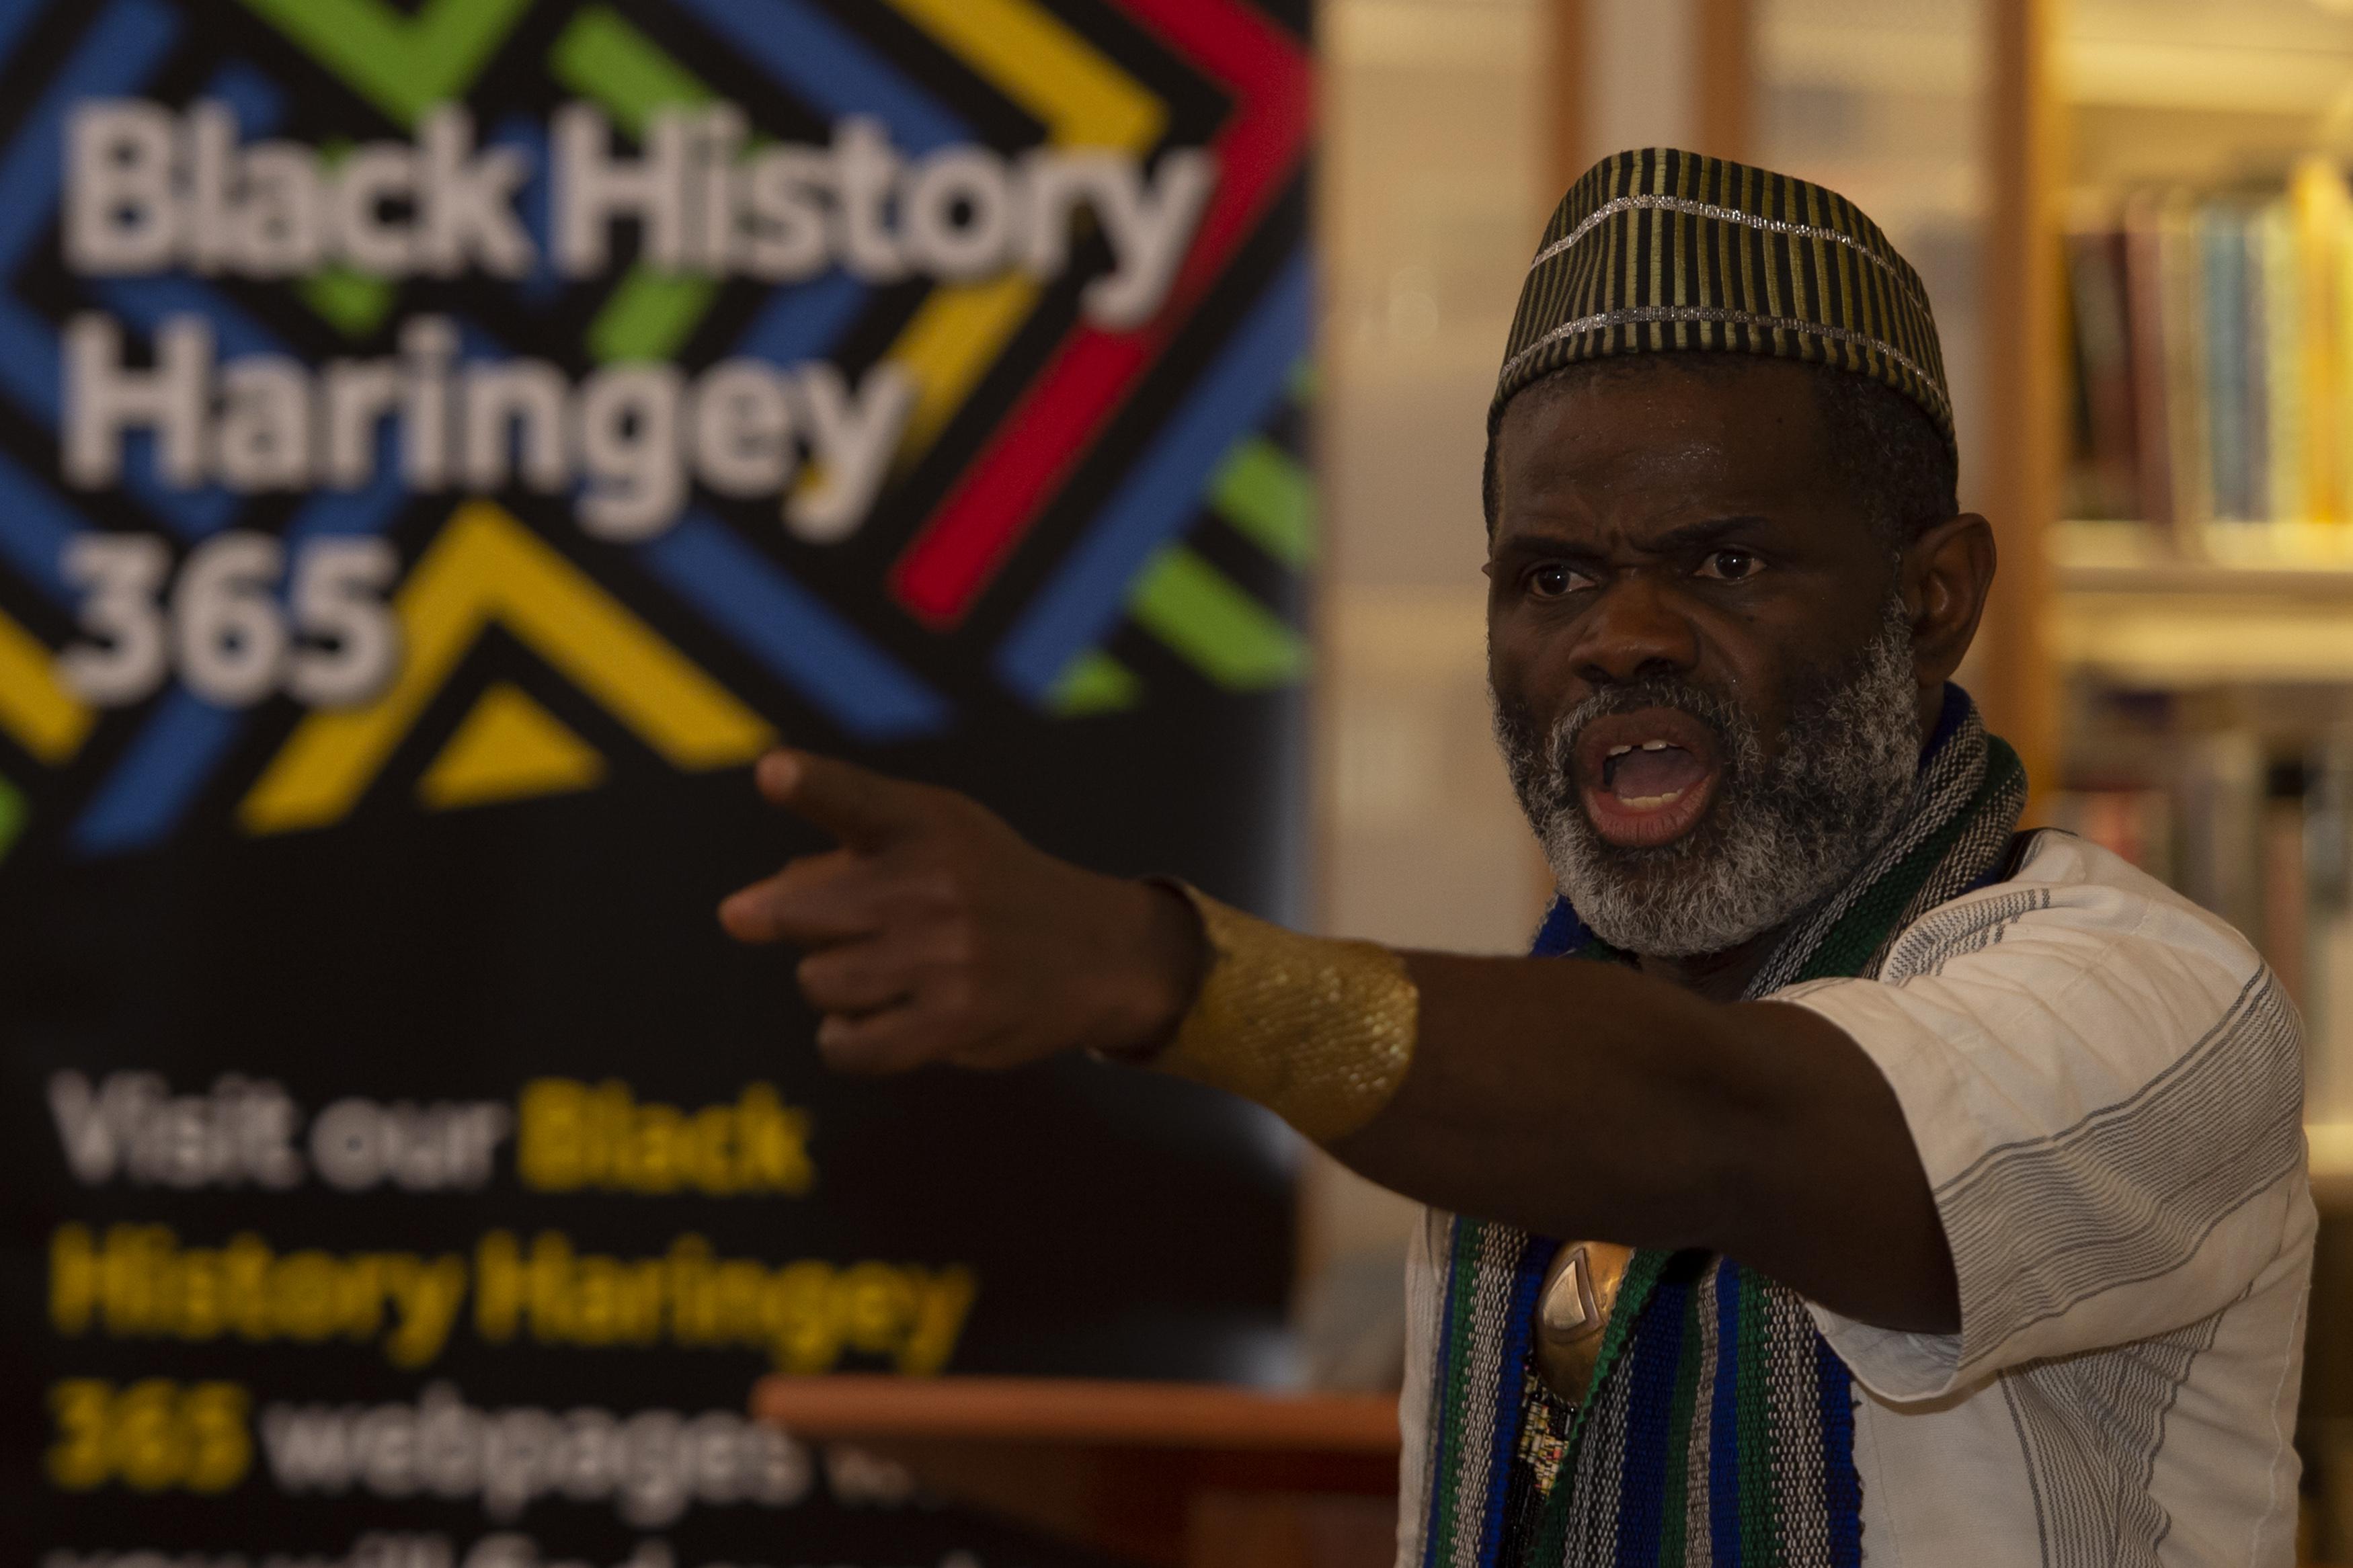 Usifu Jalloh performing at our Black History Haringey 365 launch event